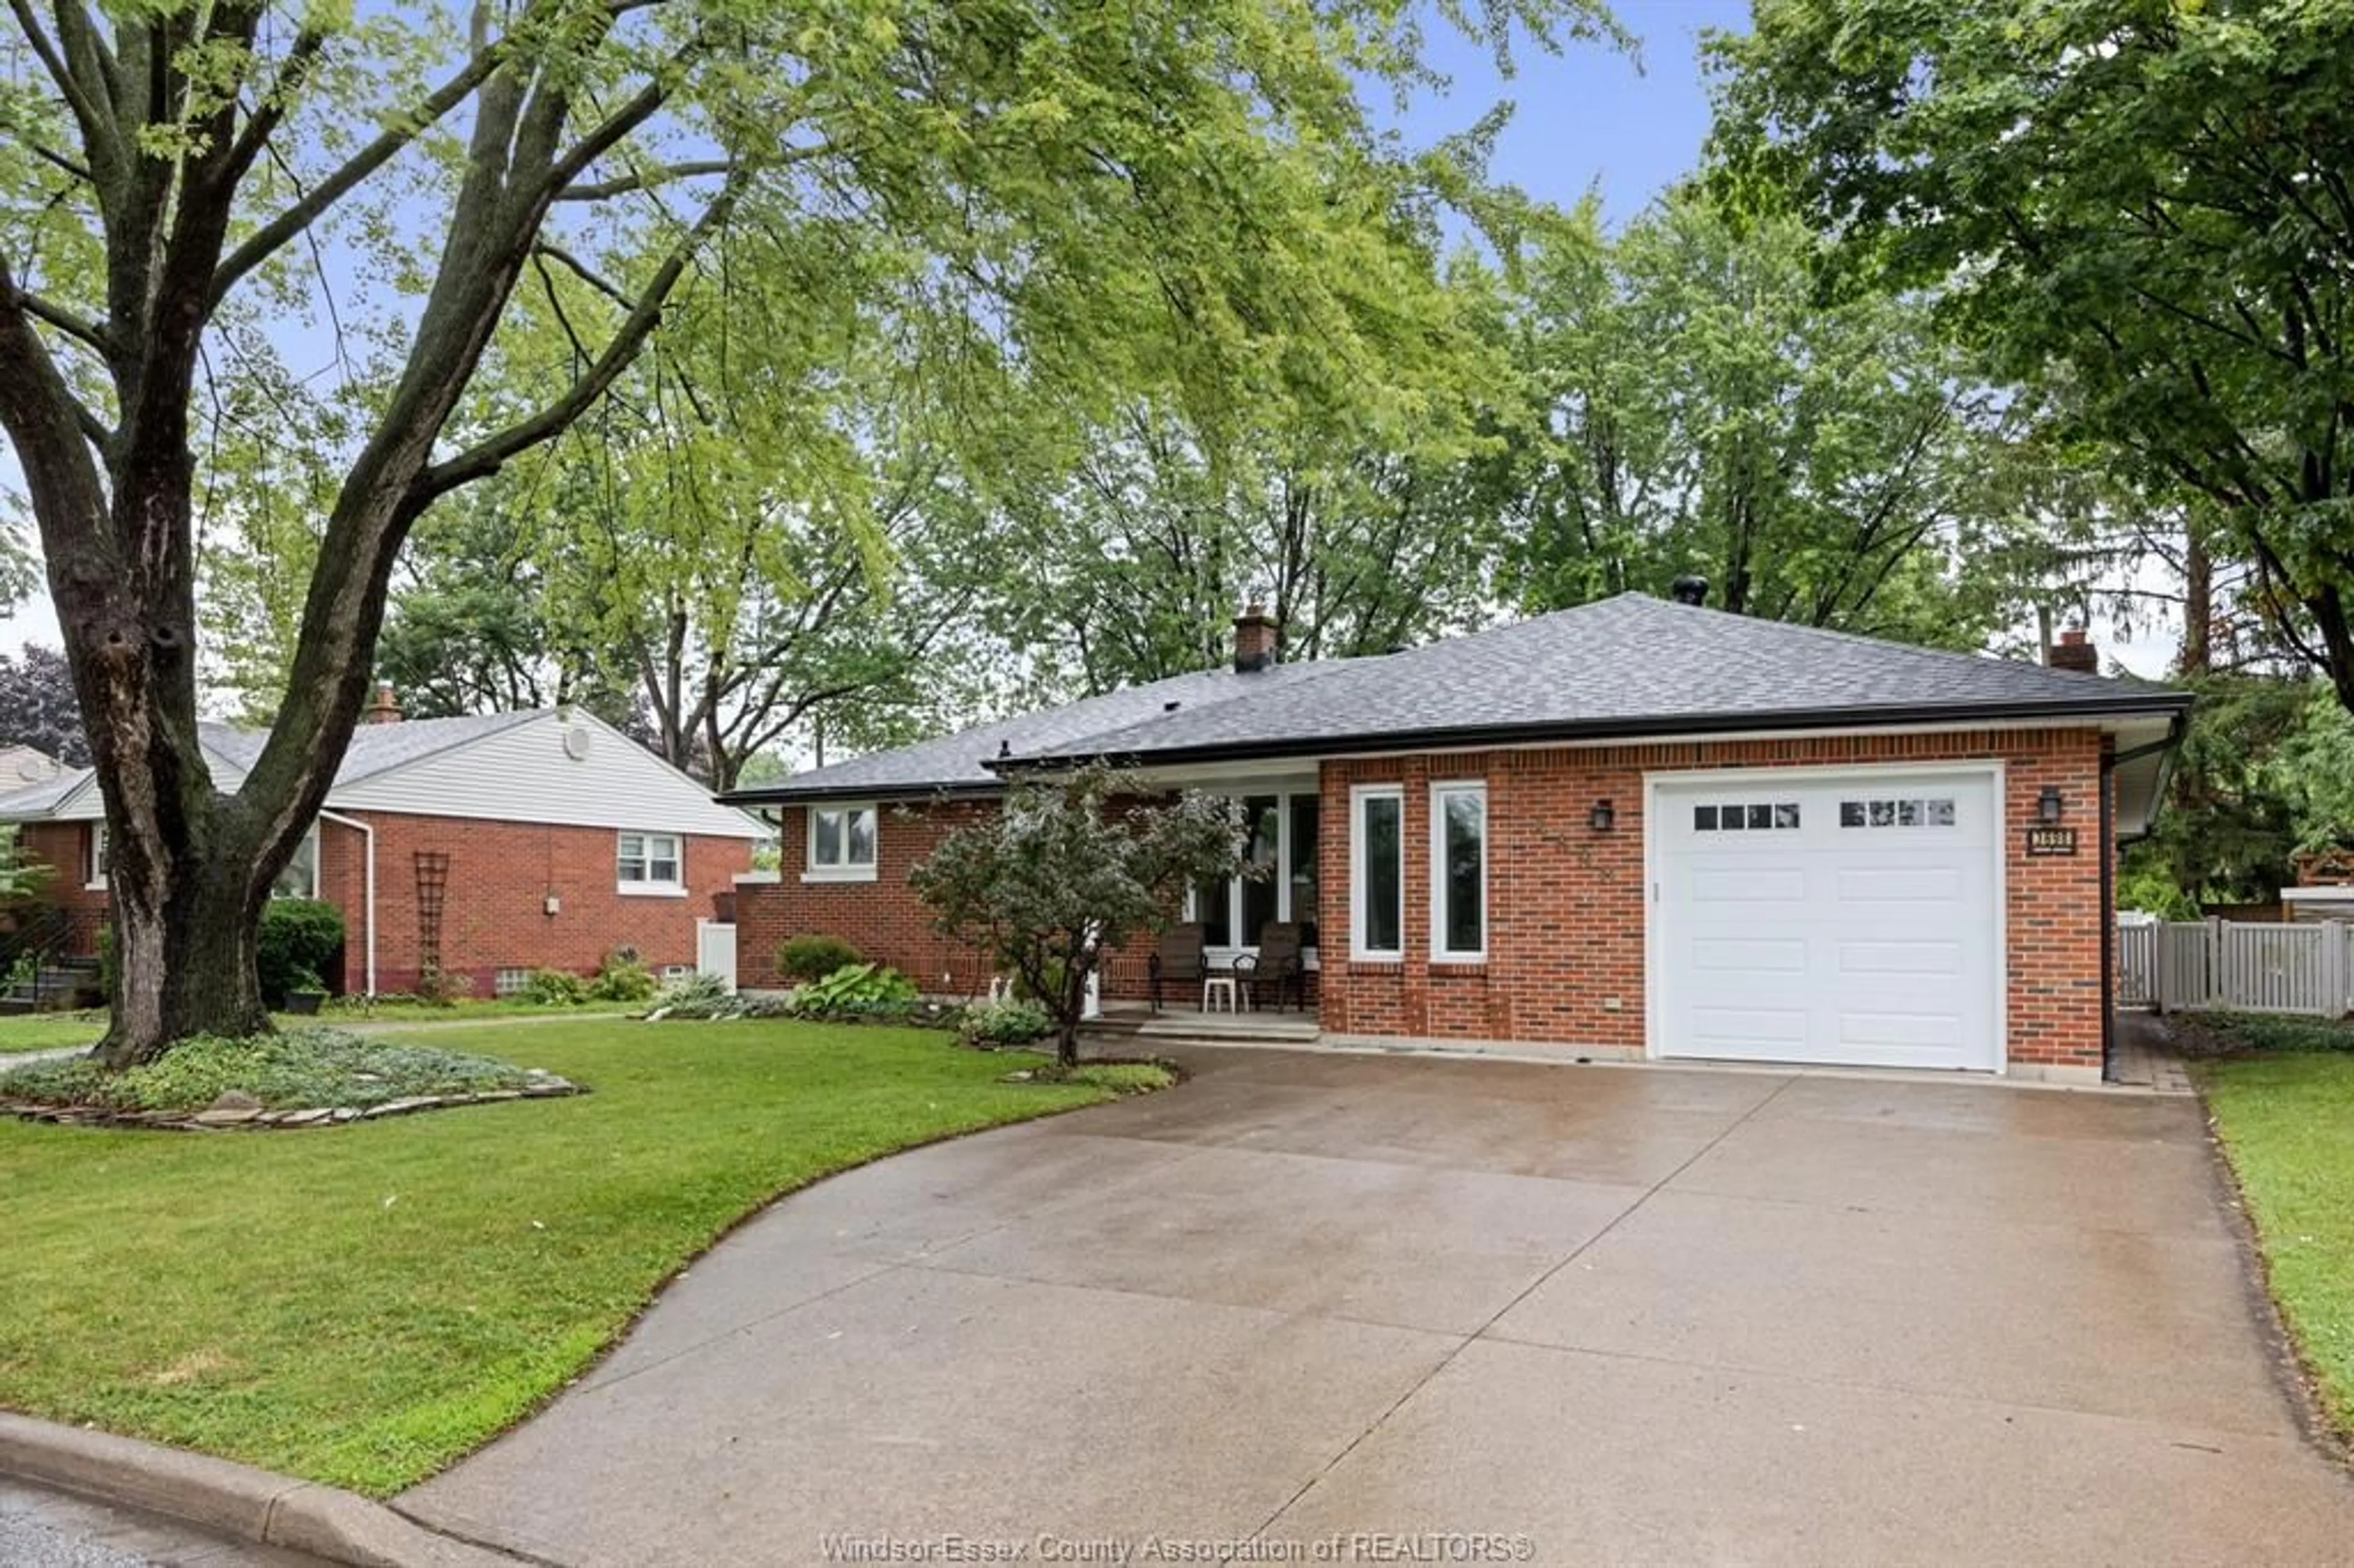 Home with brick exterior material for 3698 MCKAY, Windsor Ontario N9E 2S2